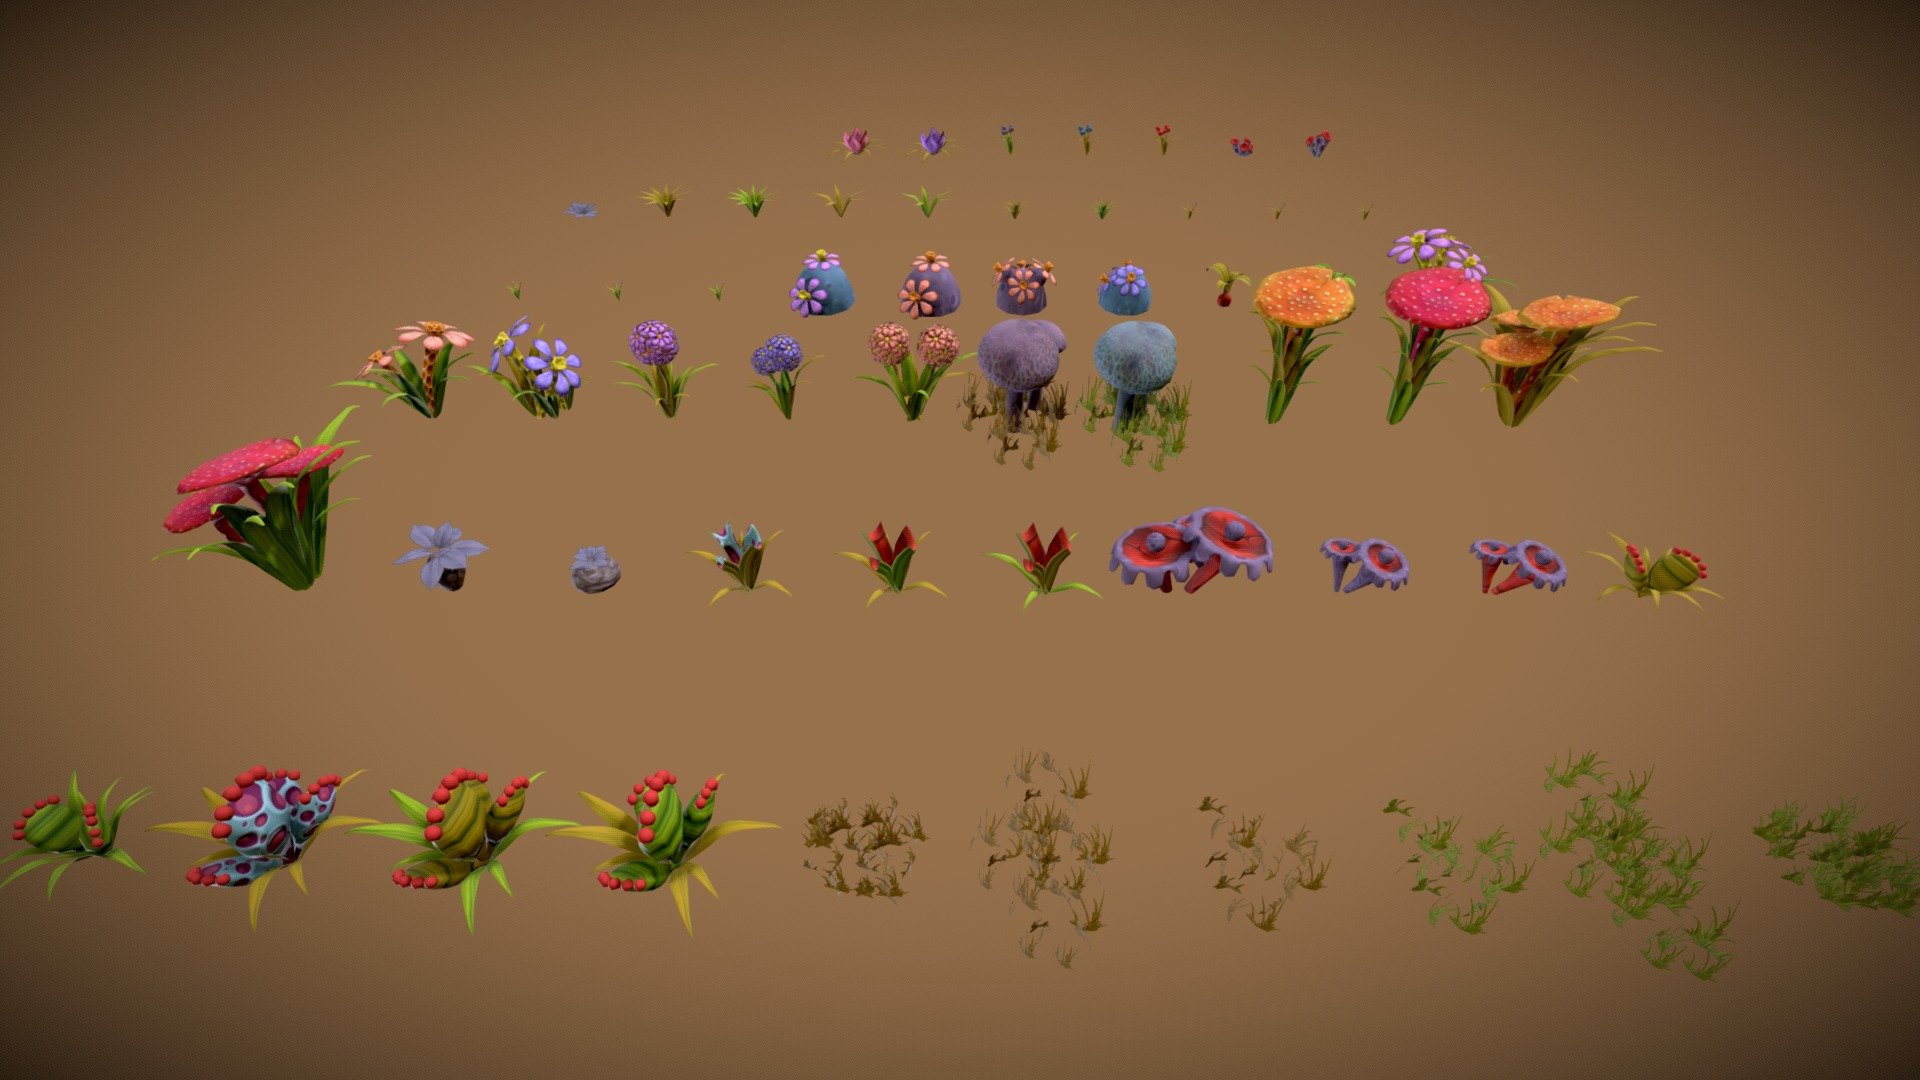 Price reduction by 50%.

The assets contains vegetation ready to use for PC or mobile devices.

The total number of objects: 57

This package contains:

1) Models:




57 Plants (76 - 3565 tris).

2) Textures:




1 Atlas textures (Diffuse Map + Normal Map) - resolution 1024x1024.
 - Stylized Fantasy Vegetation 1 - 3D model by Infinity3DGame 3d model